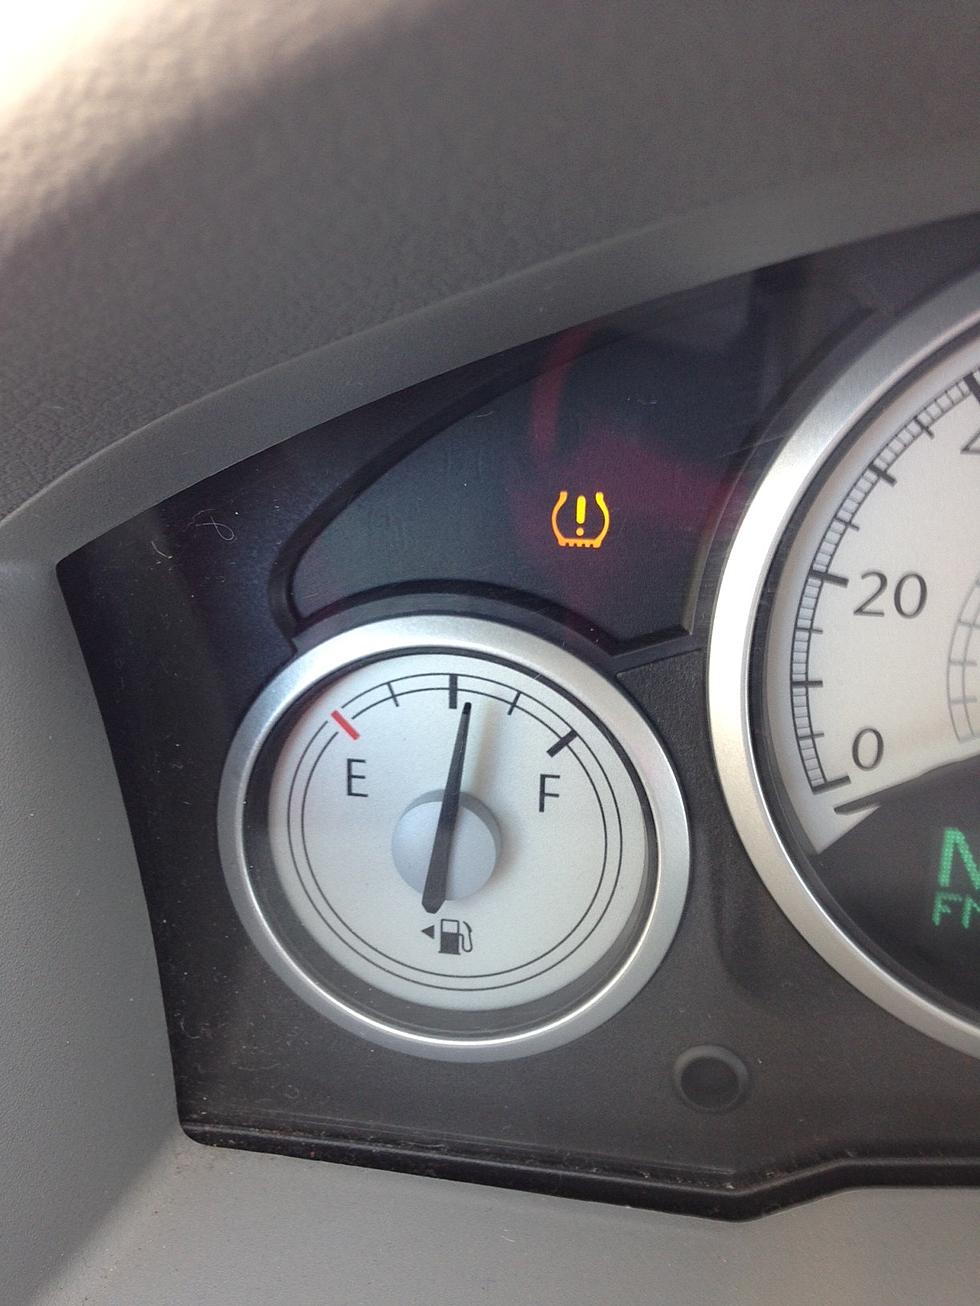 Do You Know What The Arrow On Your Gas Gauge Means? It Pains Me To Say This…